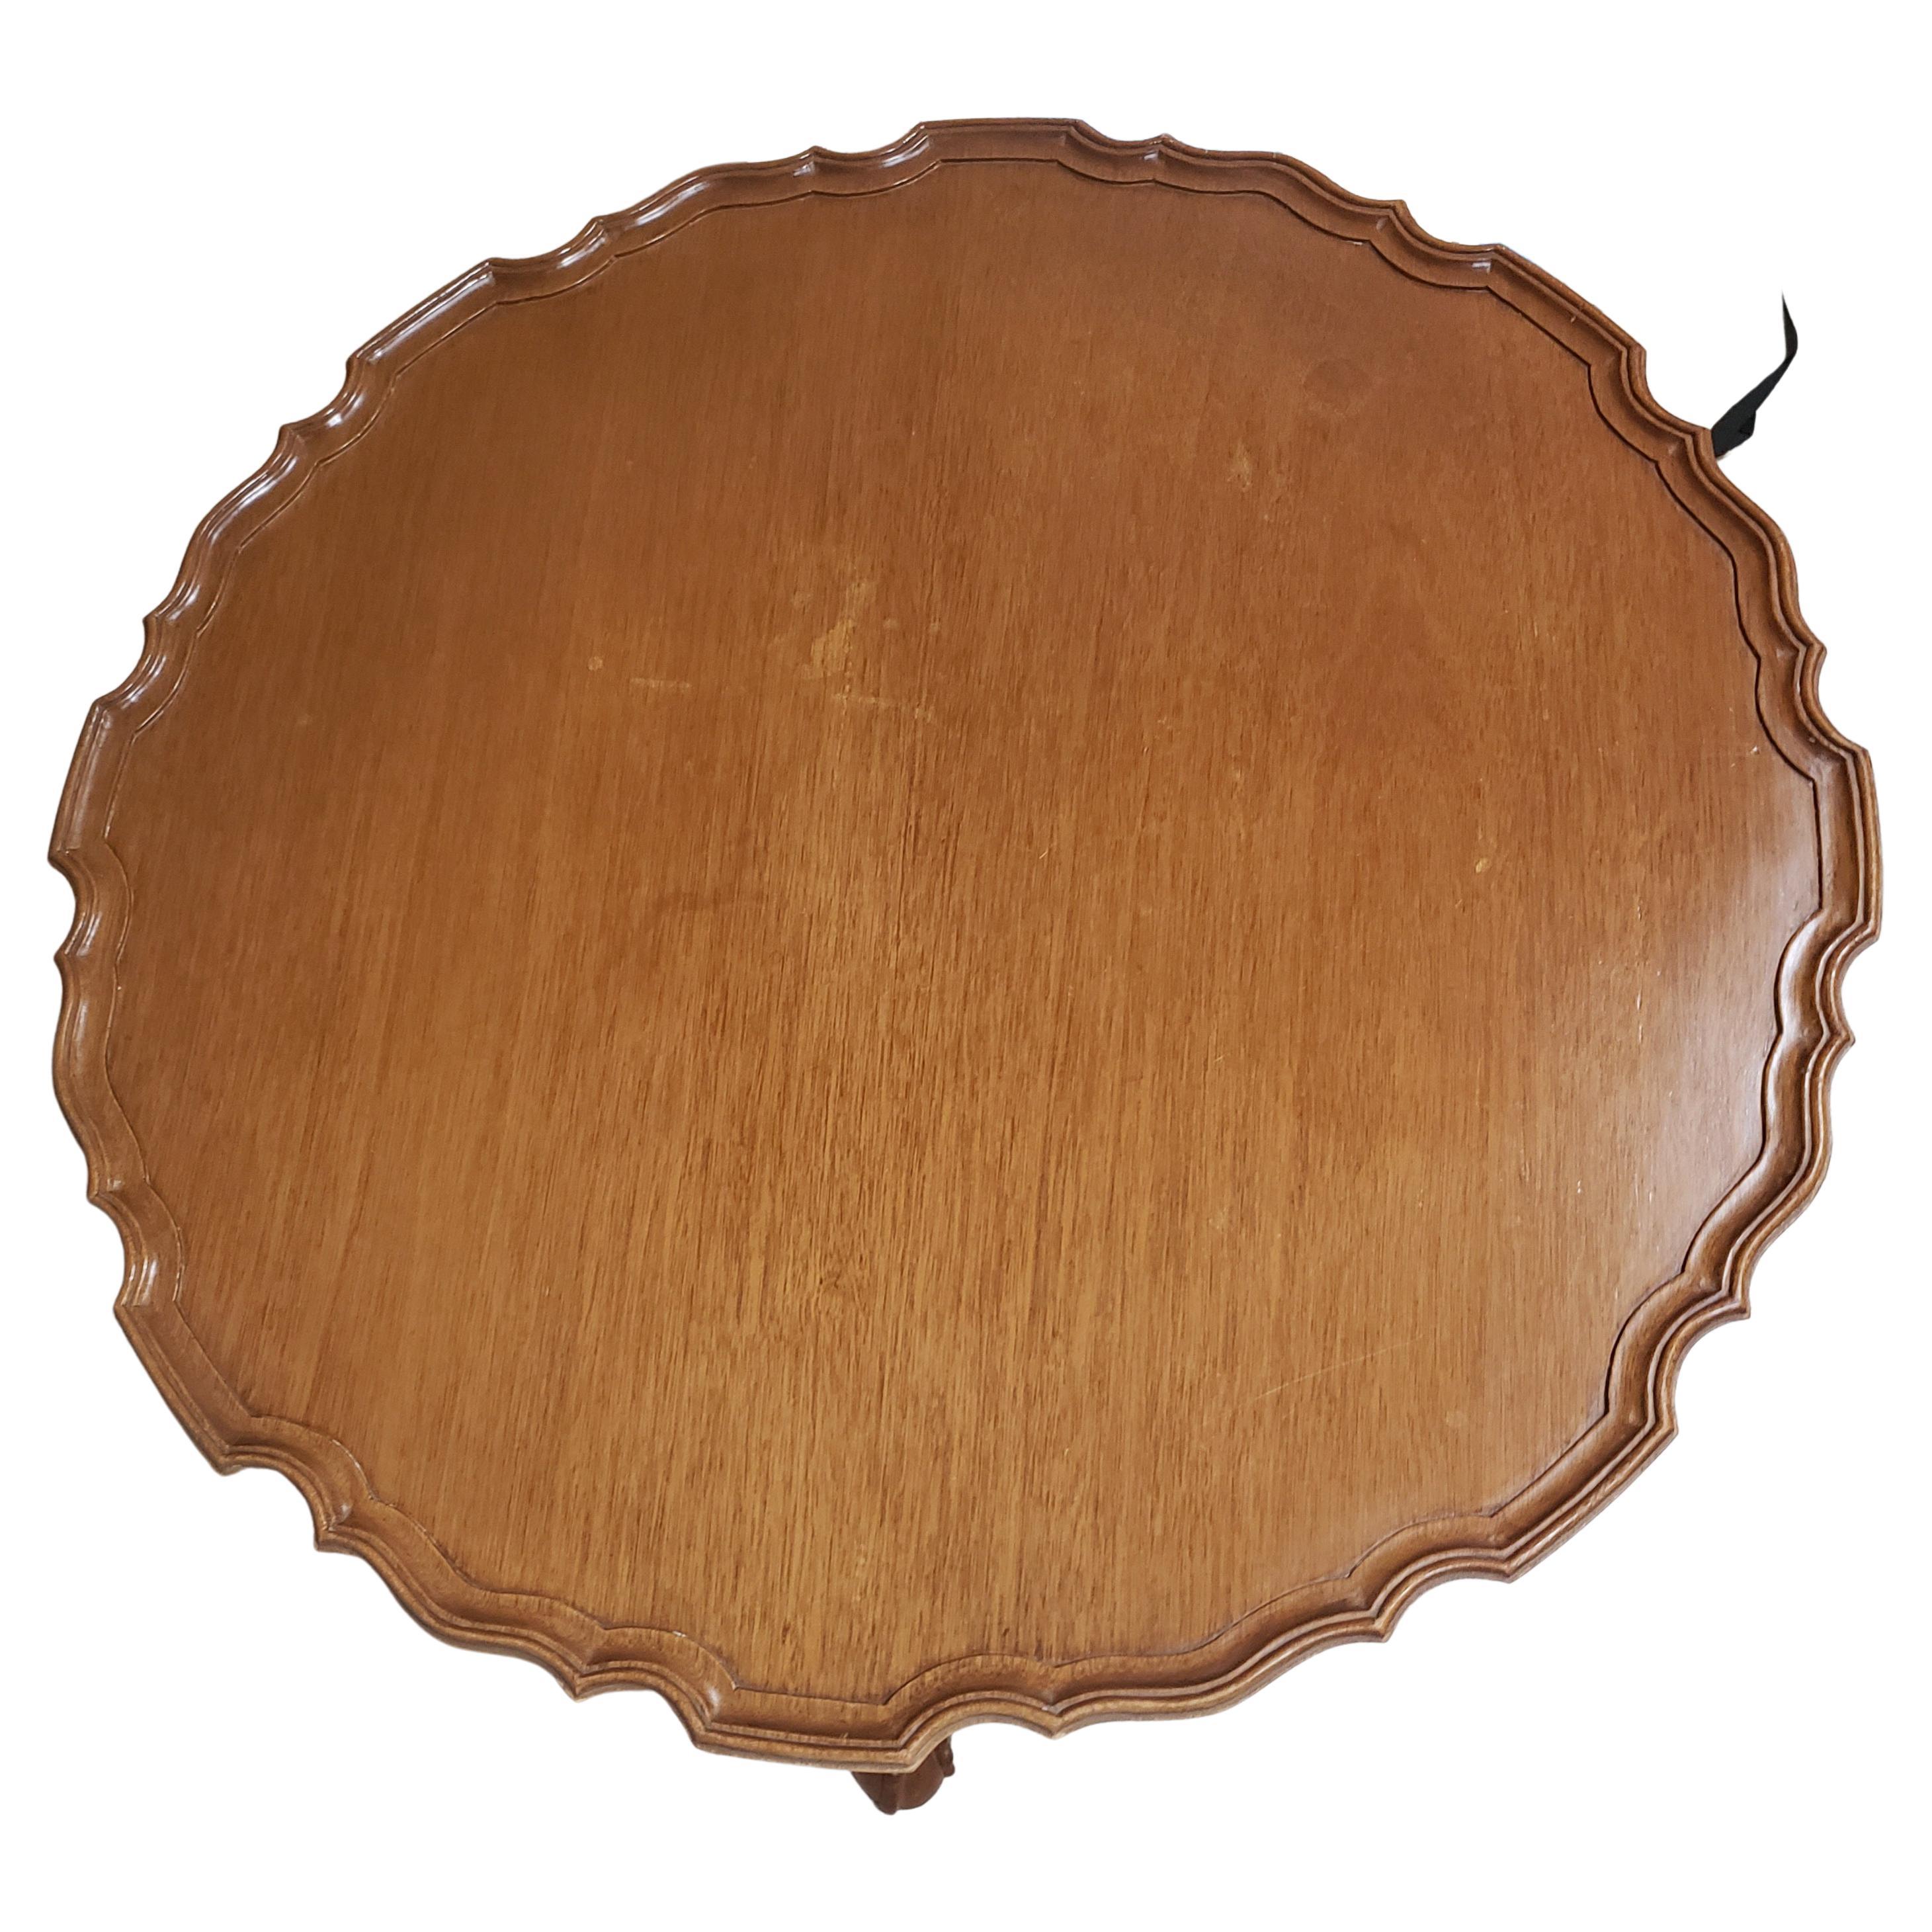 Custom Made Philadelphia Fruitwood Pie Crust Tilt Top Table, Circa 1940s In Good Condition For Sale In Germantown, MD